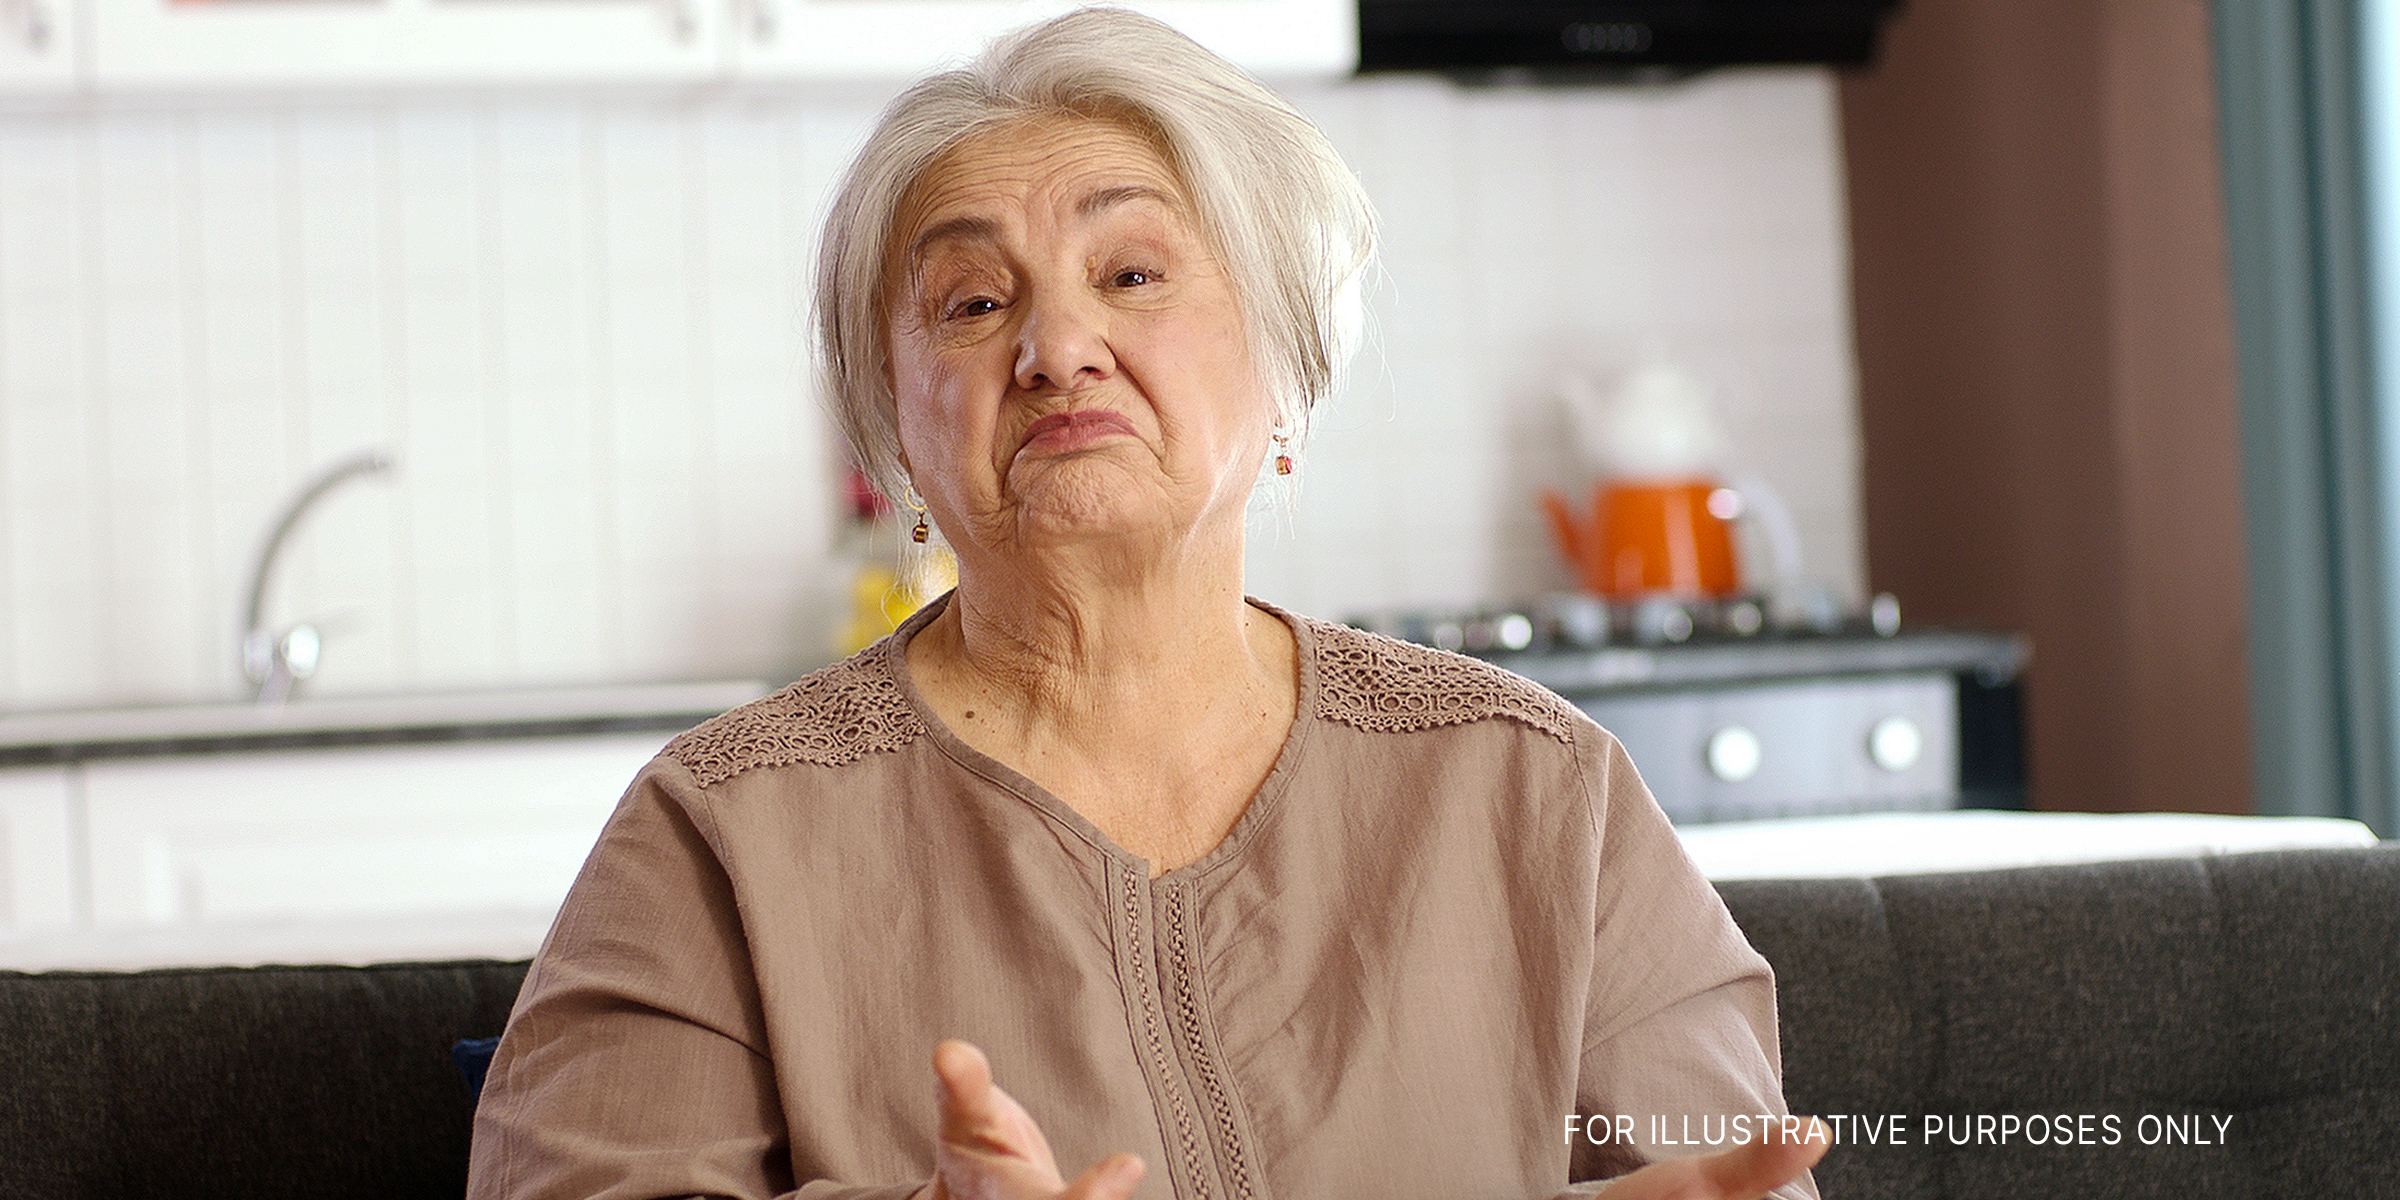 Angry older woman | Source: Shutterstock